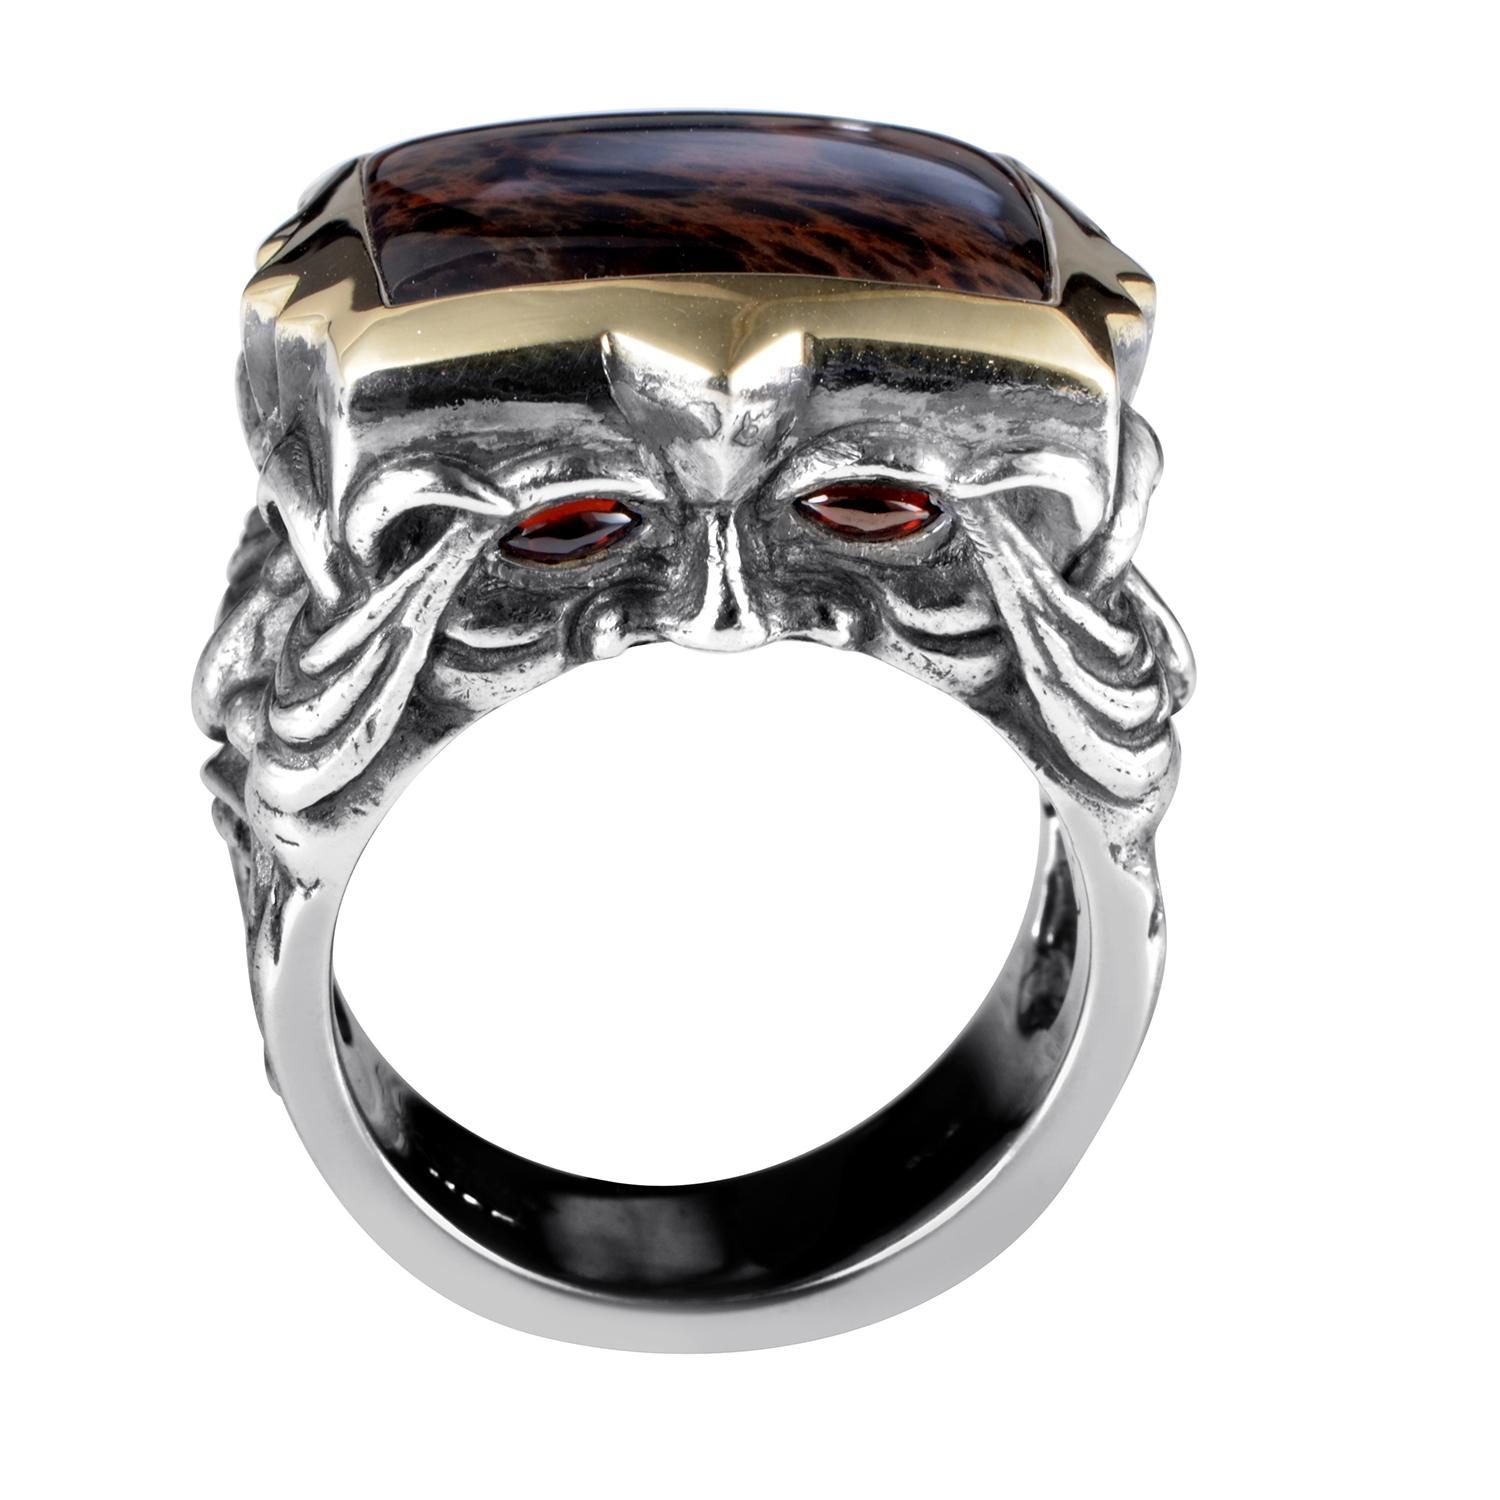 With the amazing oxidized silver body depicting the terrifying gargoyle faces with magnificent garnet eyes, this exceptional ring from Stephen Webster's London Calling collection also boasts the splendid spiderman jasper stone complemented by a